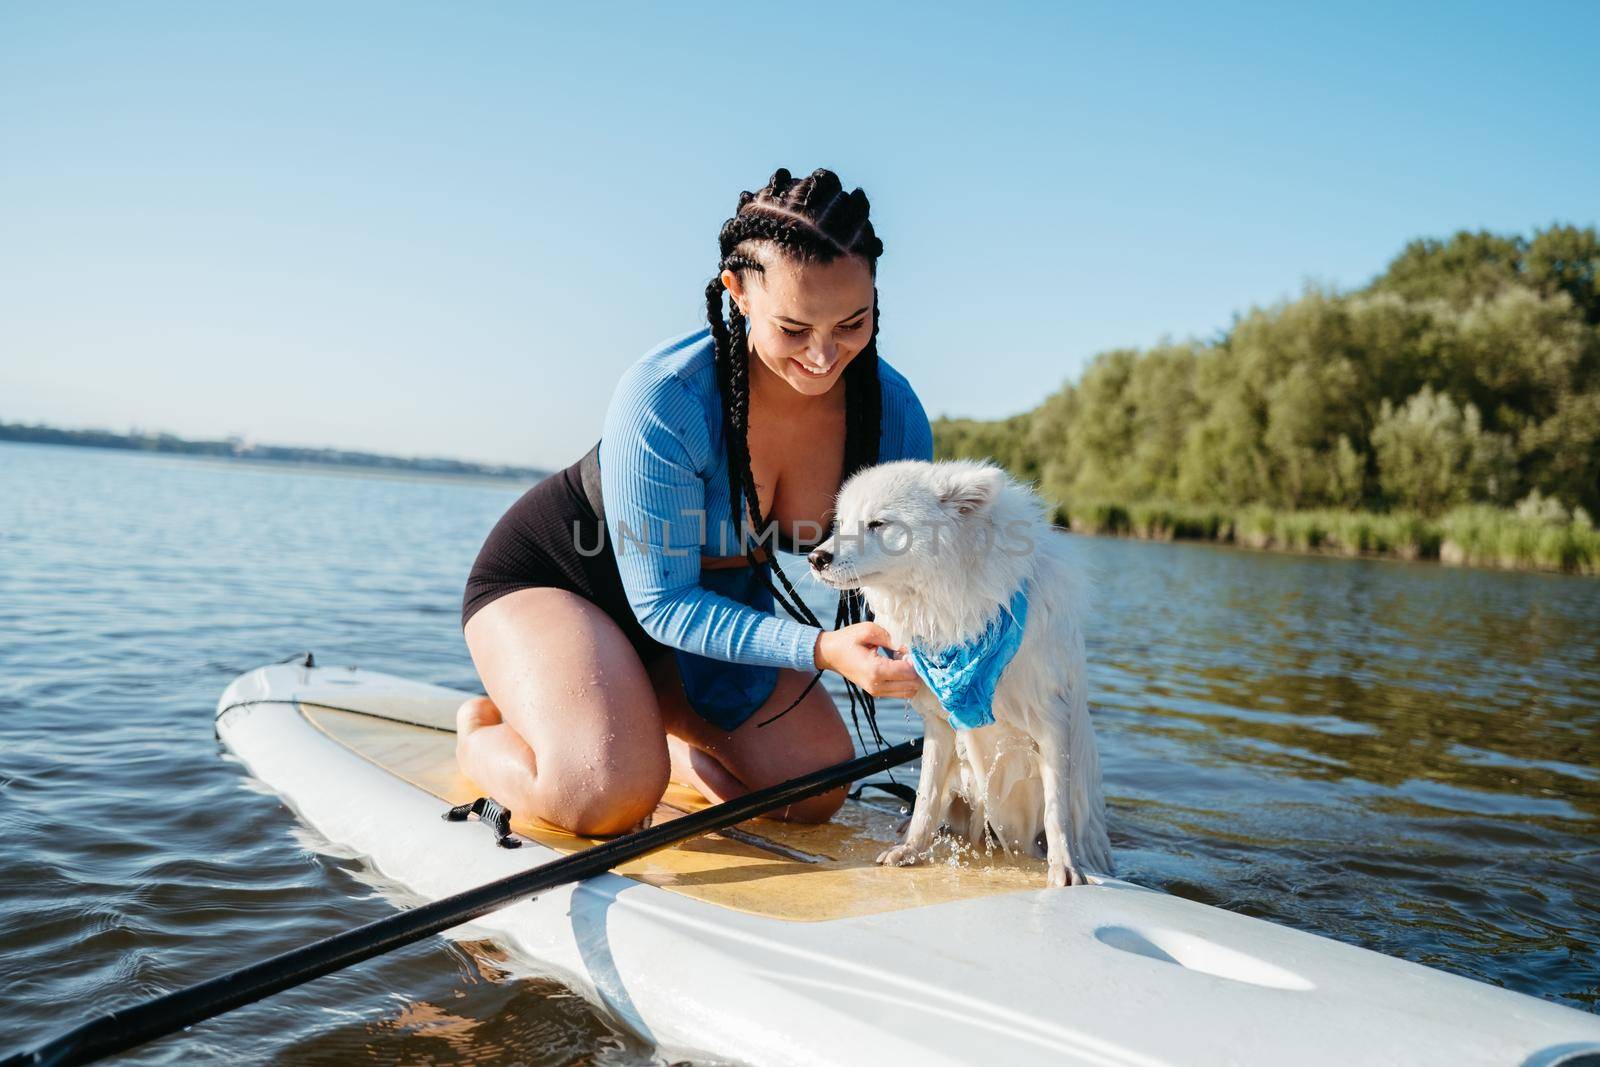 Cheerful Woman with Locs Helping Her Dog Japanese Spitz Get Out of the Water, While Sitting on Sup Board on the Lake